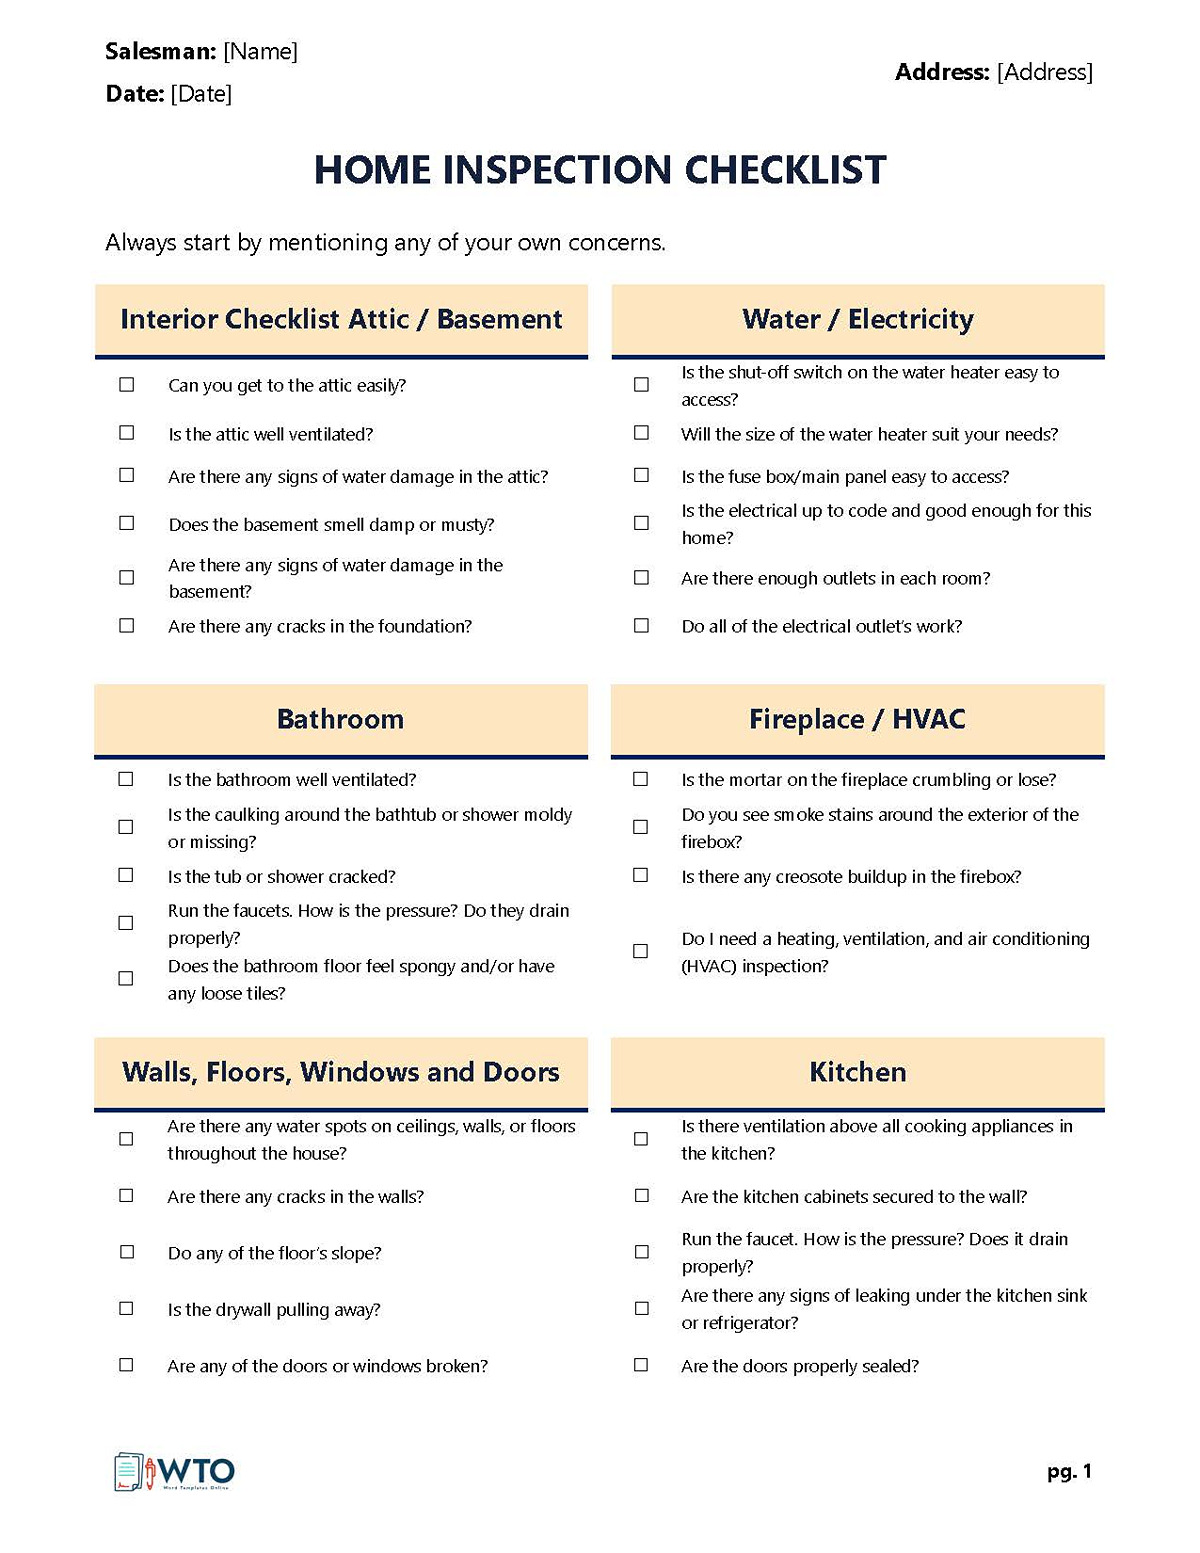 Free Home Inspection Checklist Template - Editable Format